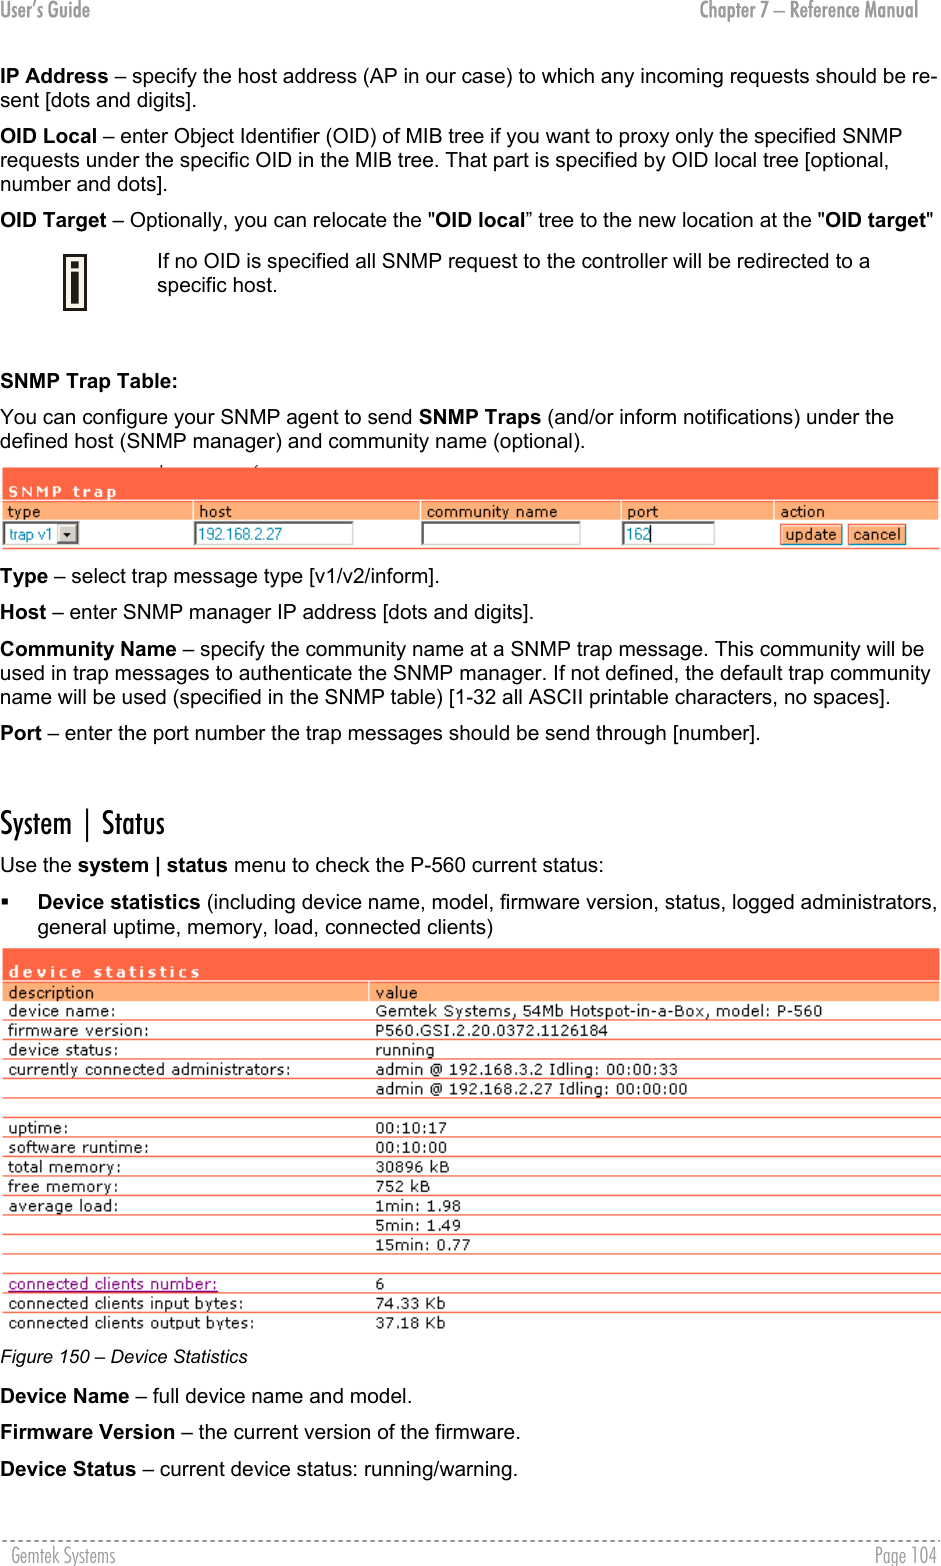 User’s Guide  Chapter 7 – Reference Manual IP Address – specify the host address (AP in our case) to which any incoming requests should be re-sent [dots and digits]. OID Local – enter Object Identifier (OID) of MIB tree if you want to proxy only the specified SNMP requests under the specific OID in the MIB tree. That part is specified by OID local tree [optional, number and dots]. OID Target – Optionally, you can relocate the &quot;OID local” tree to the new location at the &quot;OID target&quot;  If no OID is specified all SNMP request to the controller will be redirected to a specific host.  SNMP Trap Table: You can configure your SNMP agent to send SNMP Traps (and/or inform notifications) under the defined host (SNMP manager) and community name (optional).  Type – select trap message type [v1/v2/inform]. Host – enter SNMP manager IP address [dots and digits]. Community Name – specify the community name at a SNMP trap message. This community will be used in trap messages to authenticate the SNMP manager. If not defined, the default trap community name will be used (specified in the SNMP table) [1-32 all ASCII printable characters, no spaces]. Port – enter the port number the trap messages should be send through [number].  System | Status Use the system | status menu to check the P-560 current status:   Device statistics (including device name, model, firmware version, status, logged administrators, general uptime, memory, load, connected clients)  Figure 150 – Device Statistics Device Name – full device name and model. Firmware Version – the current version of the firmware. Device Status – current device status: running/warning. Gemtek Systems    Page 104  